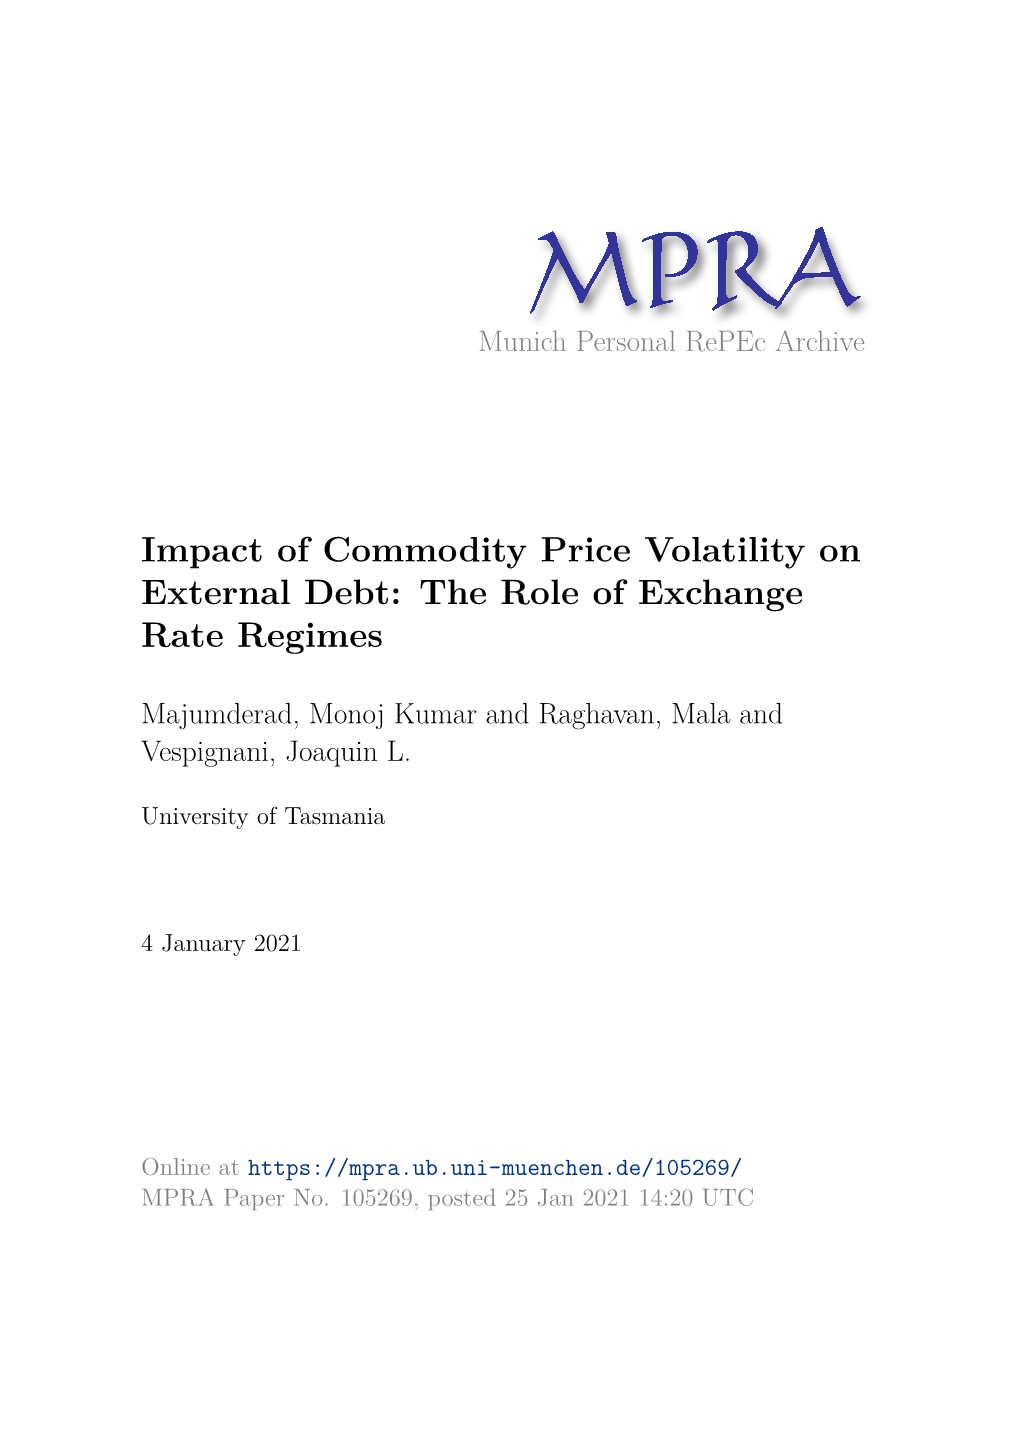 Impact of Commodity Price Volatility on External Debt: the Role of Exchange Rate Regimes